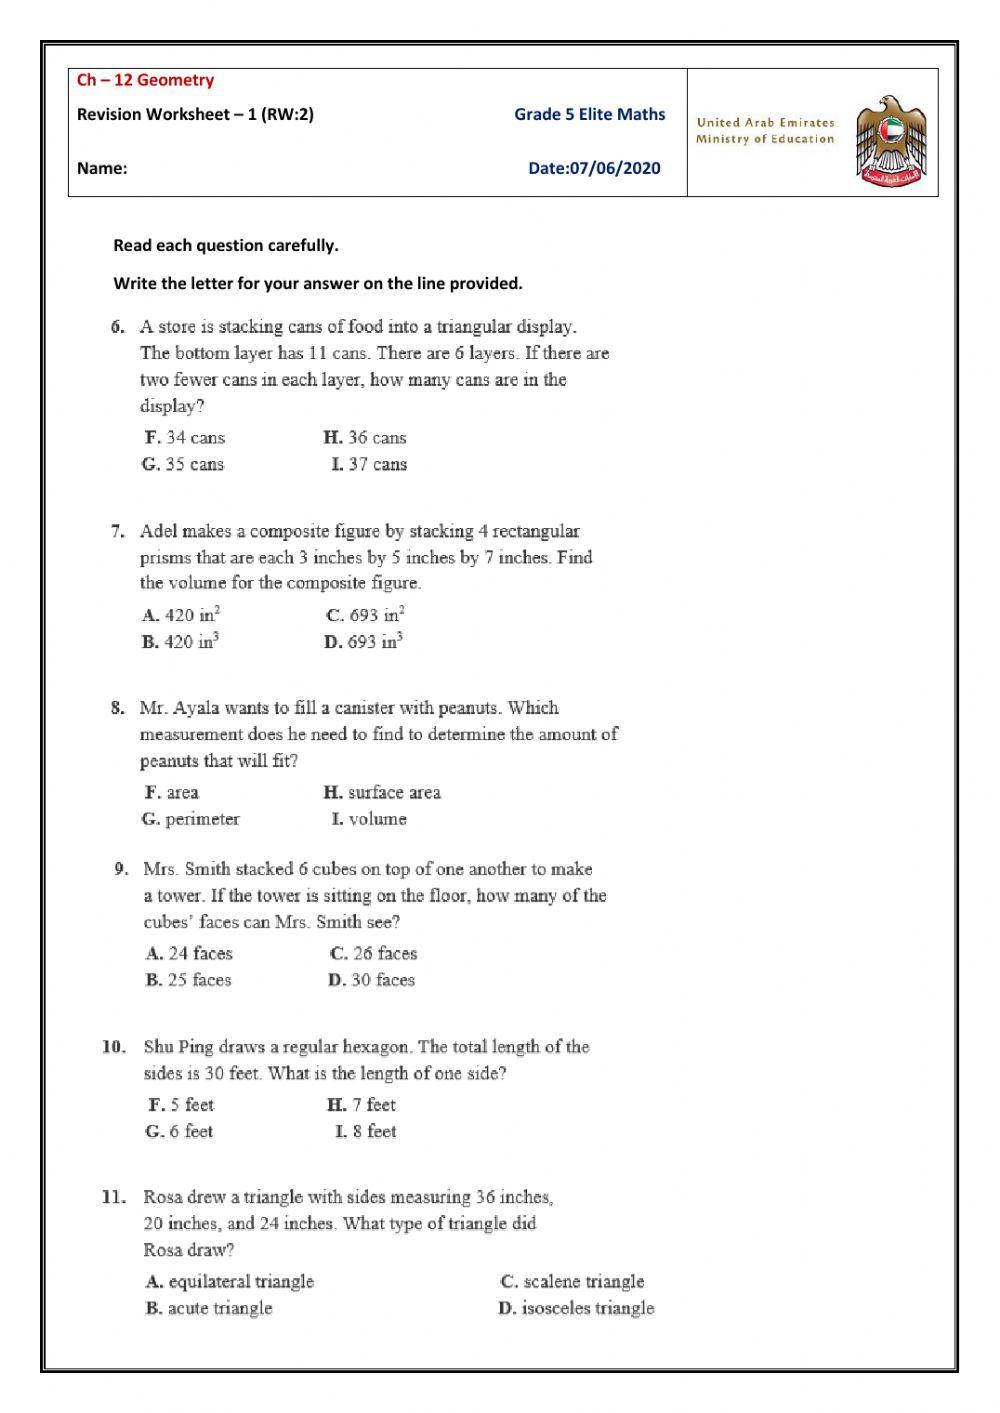 Revision Worksheet-2 on Ch-12